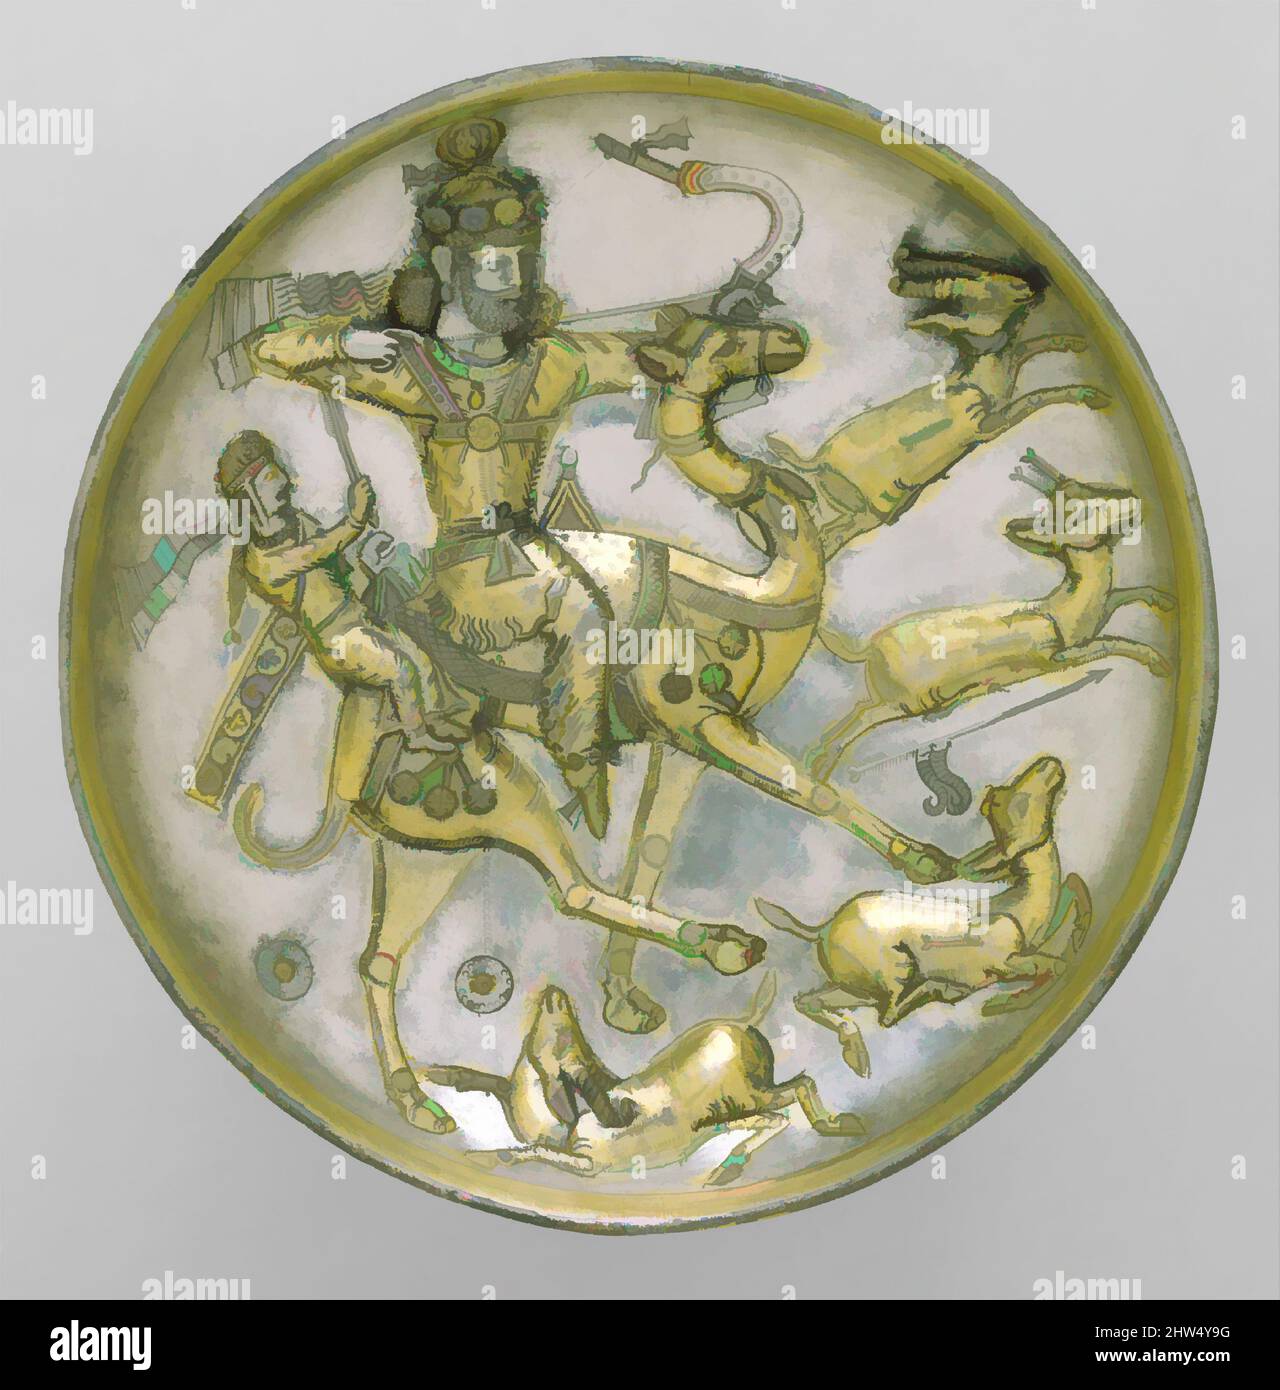 Art inspired by Plate with a hunting scene from the tale of Bahram Gur and Azadeh, Sasanian, ca. 5th century A.D., Iran, Sasanian, Silver, mercury gilding, Height 1.62 in. (4.11 cm), Diameter 7.9 in. (20.1 cm), Metalwork-Vessels-Inscribed, The imagery on this plate represents the, Classic works modernized by Artotop with a splash of modernity. Shapes, color and value, eye-catching visual impact on art. Emotions through freedom of artworks in a contemporary way. A timeless message pursuing a wildly creative new direction. Artists turning to the digital medium and creating the Artotop NFT Stock Photo